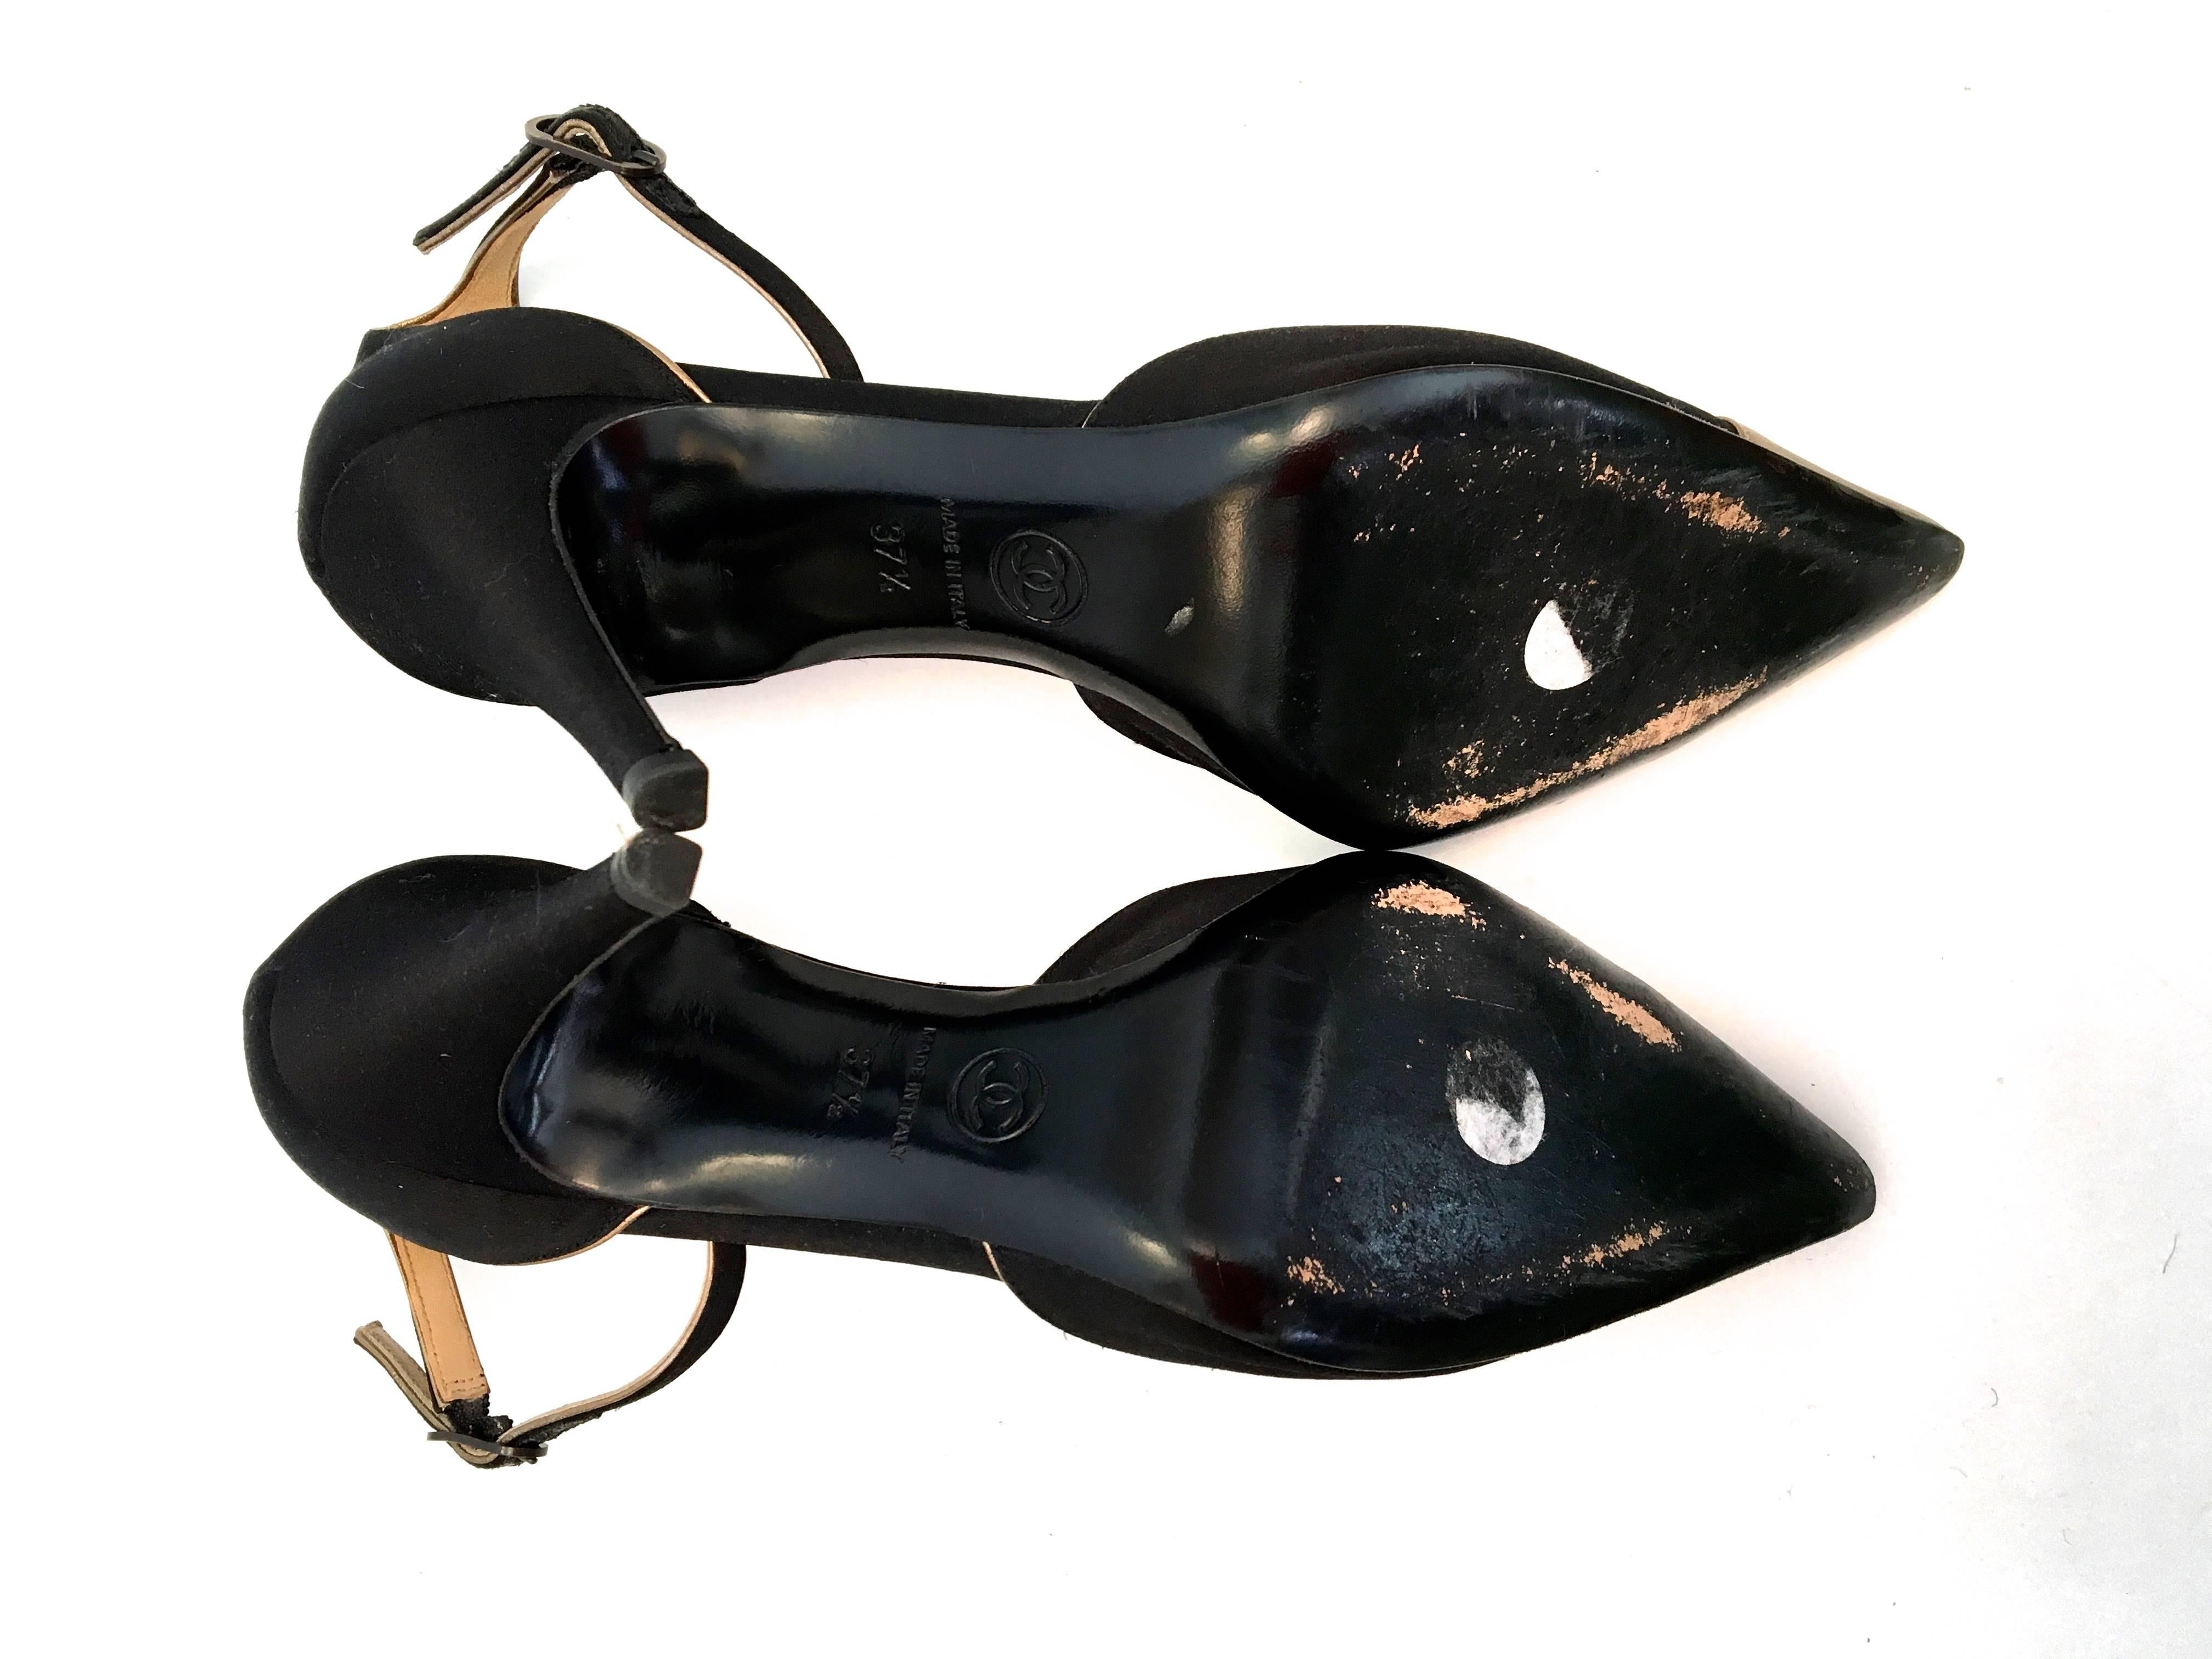 Presented here is a beautiful pair of Chanel heels. The heels are black satin with gold leather trim on the exterior and interior of the shoe. They are a size 37.5. The shoes have a 3.4 inch heel. The total length of the shoe is 10.5 inches. The